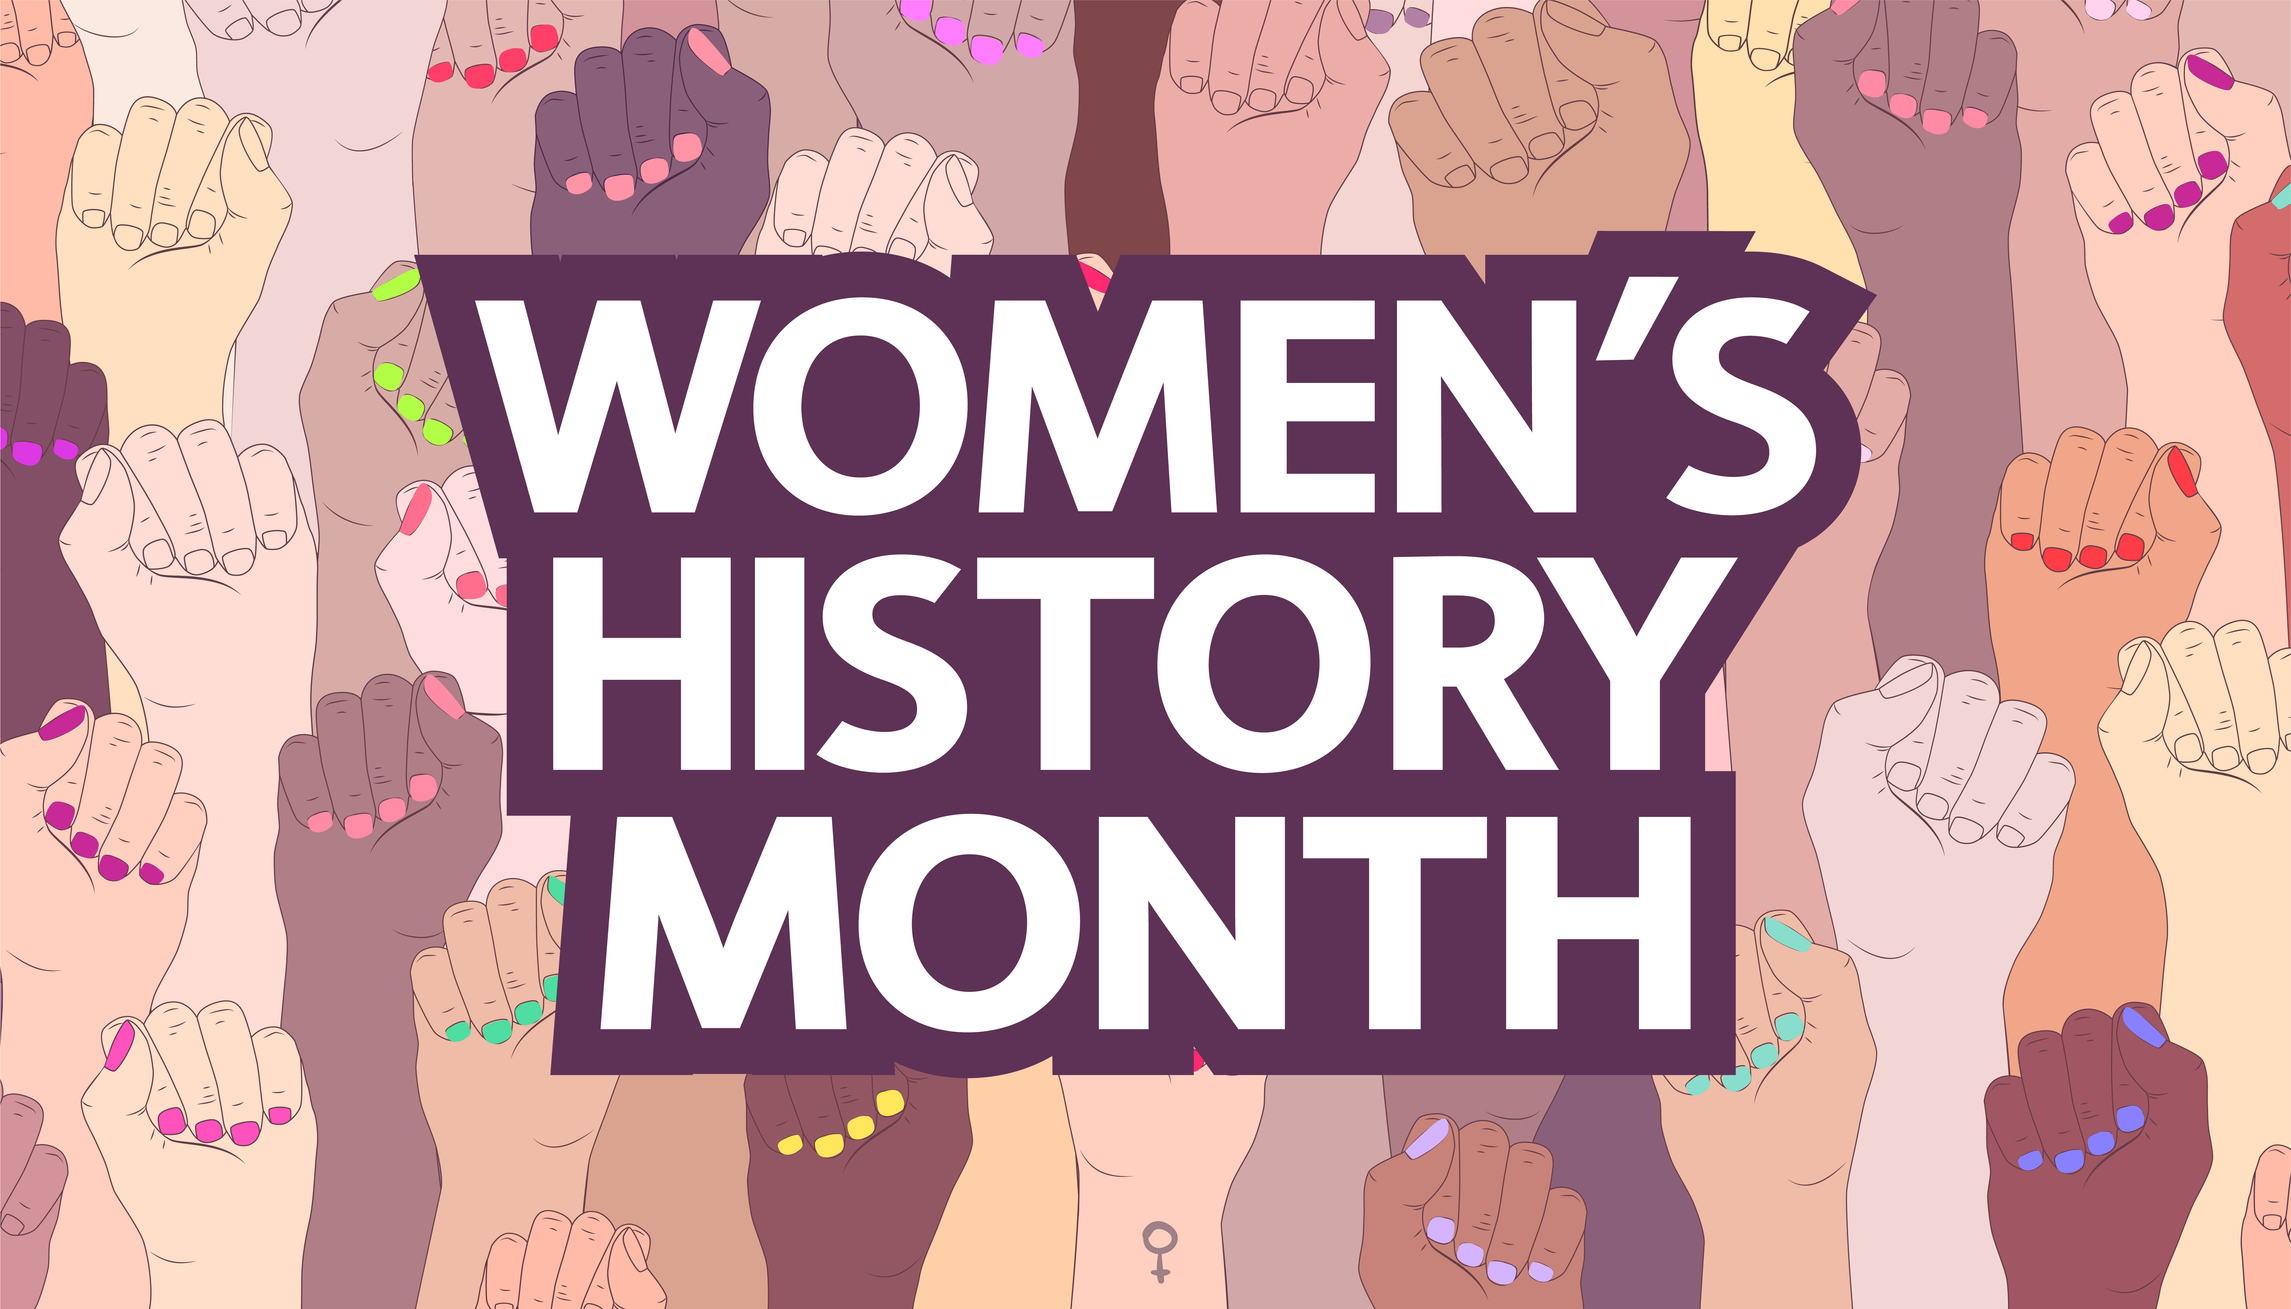 Teaching Resources for Women’s History Month